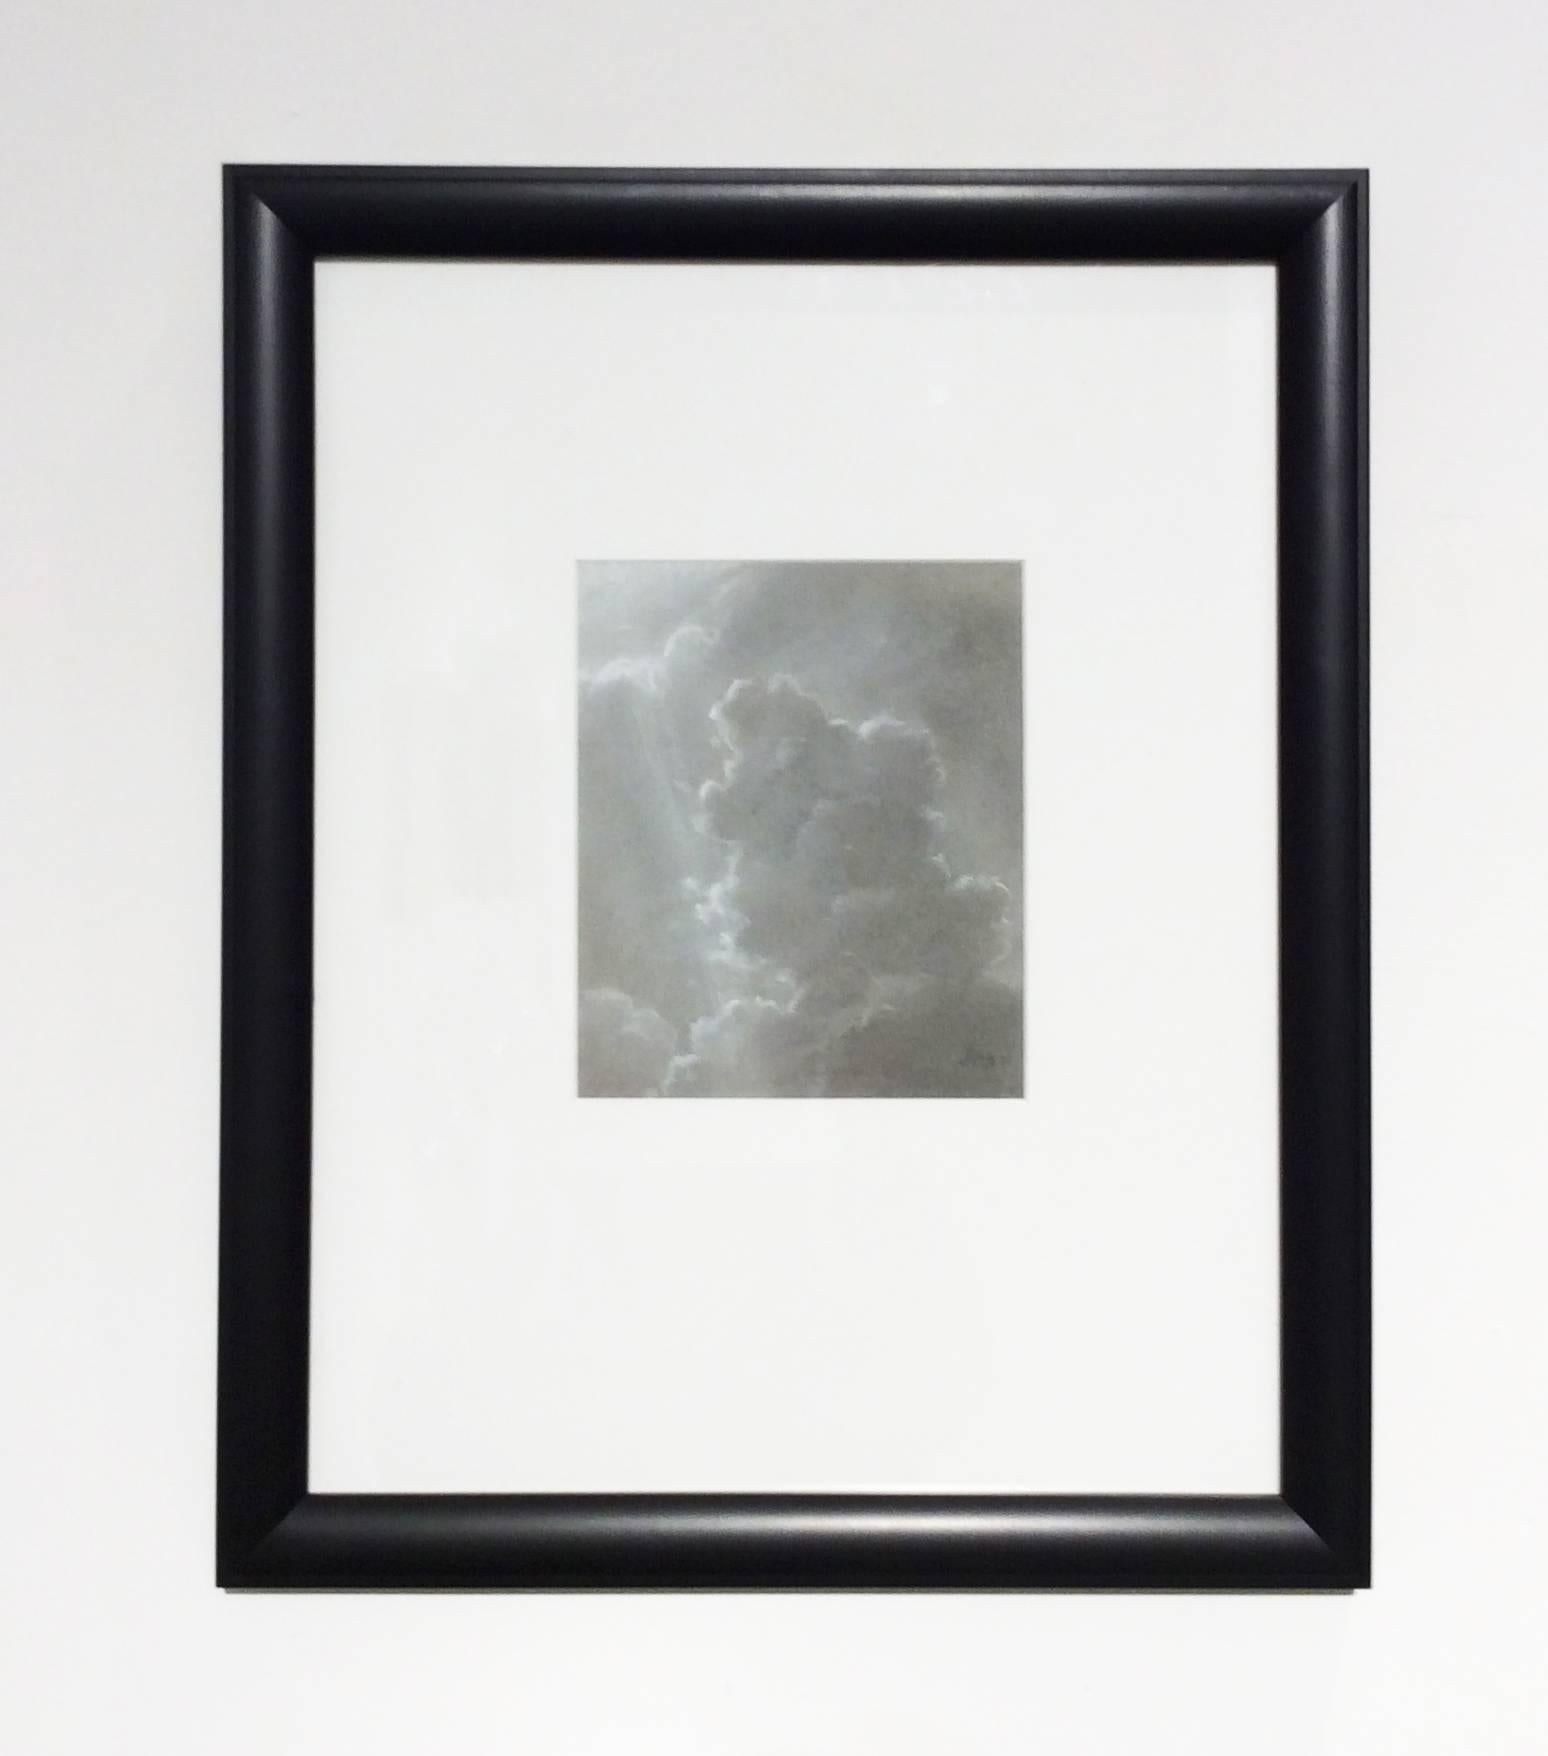 Emanating (Black & White Charcoal Landscape Drawing of Sunlit Clouds, Framed) - Art by Jane Bloodgood-Abrams